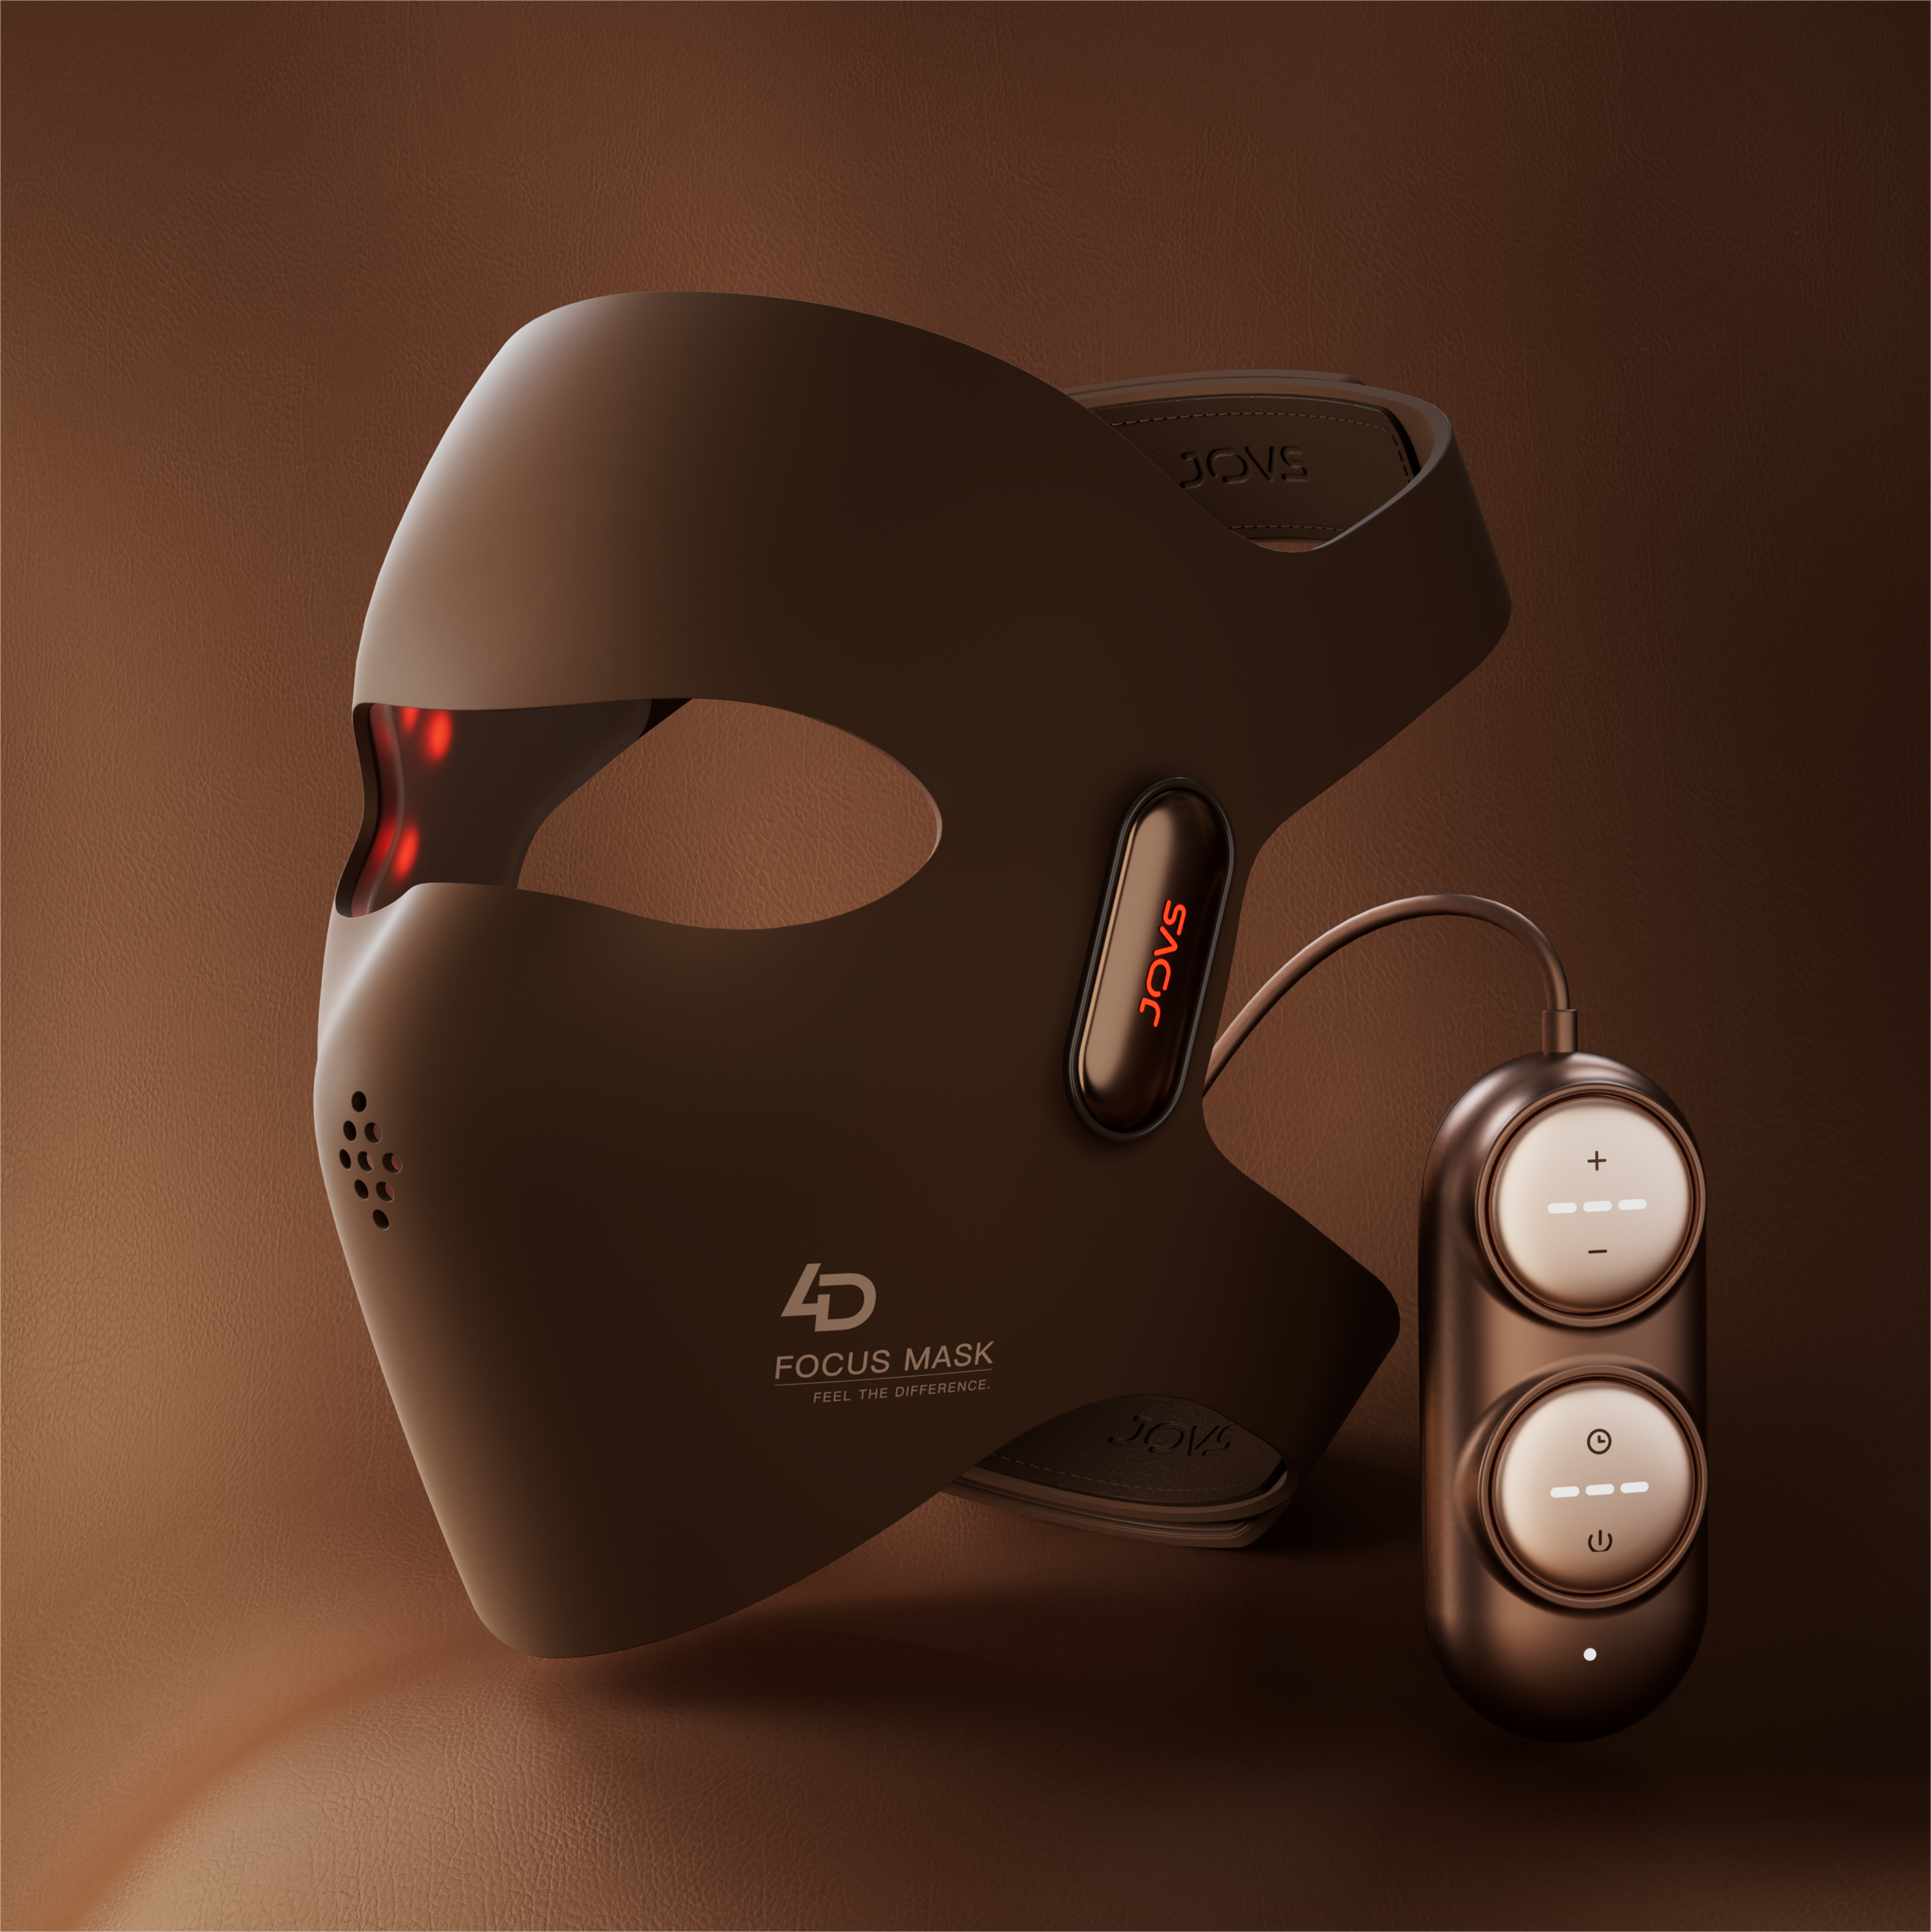 JOVS 4D Laser Mask showcases cutting-edge photorejuvenation technology with an ergonomic design and an intuitive smart controller for a tailored skincare experience.